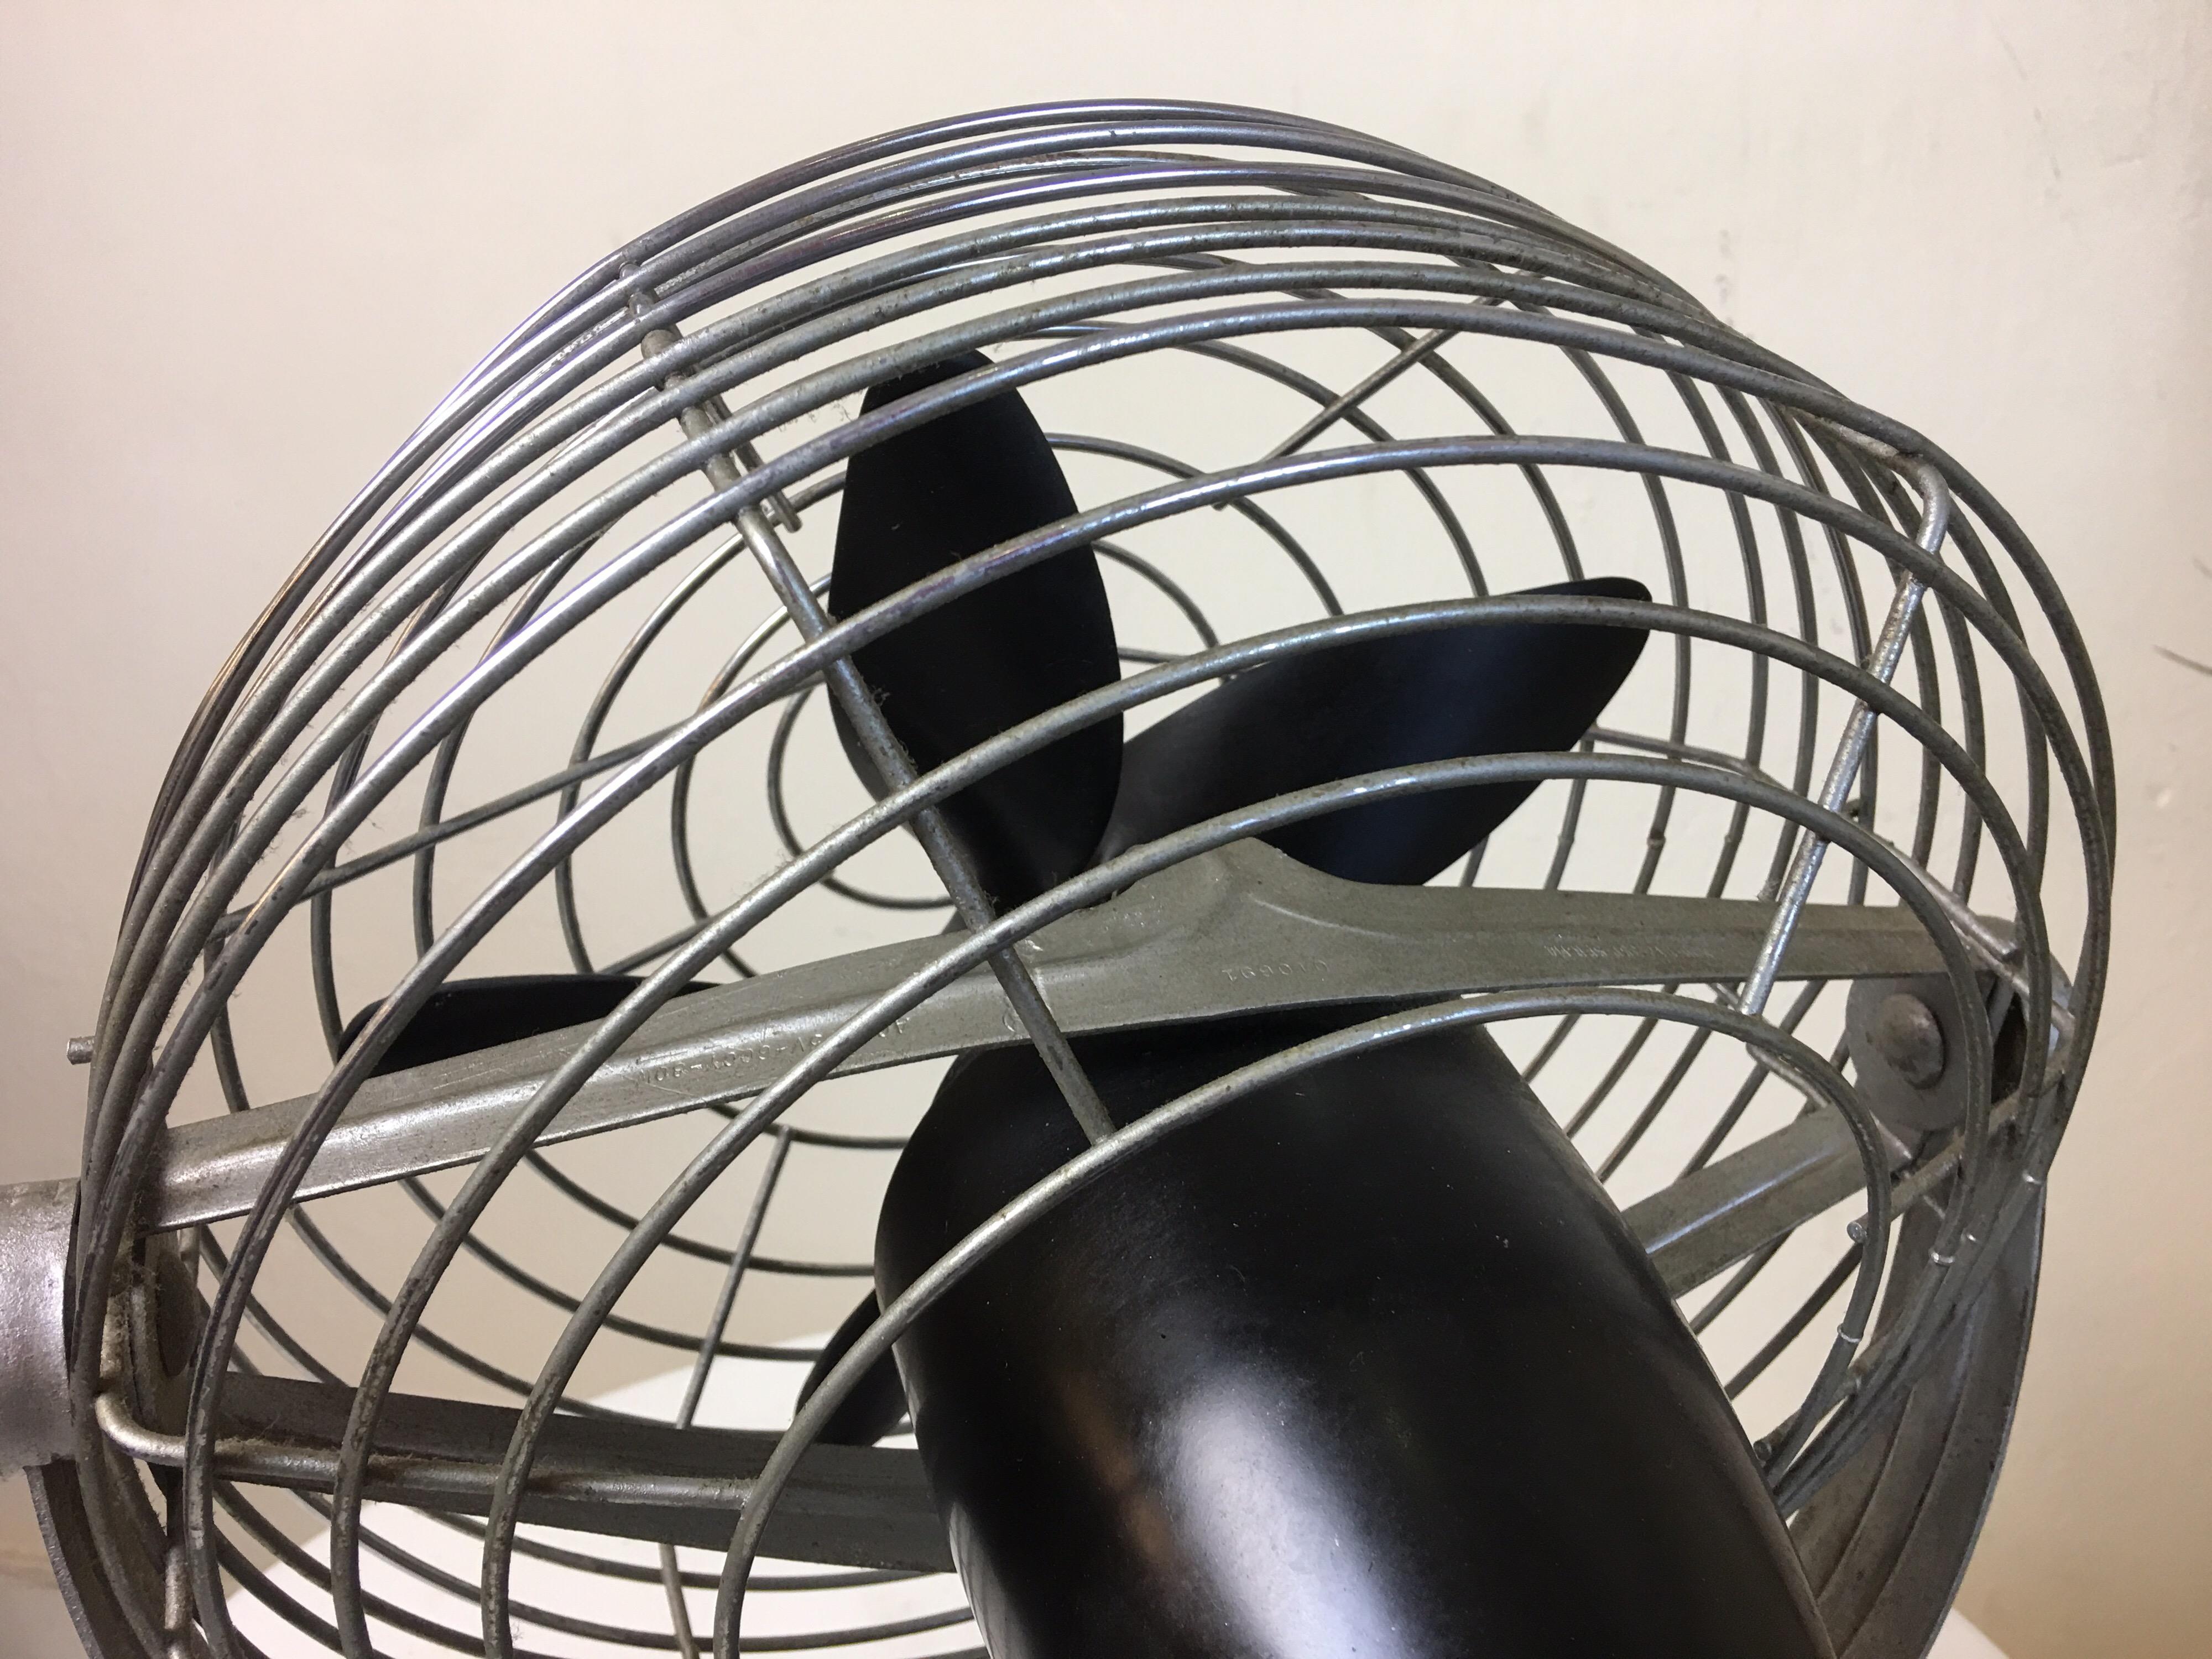 American Roto Beam Machine Age Electric Fan designed by Max Weber